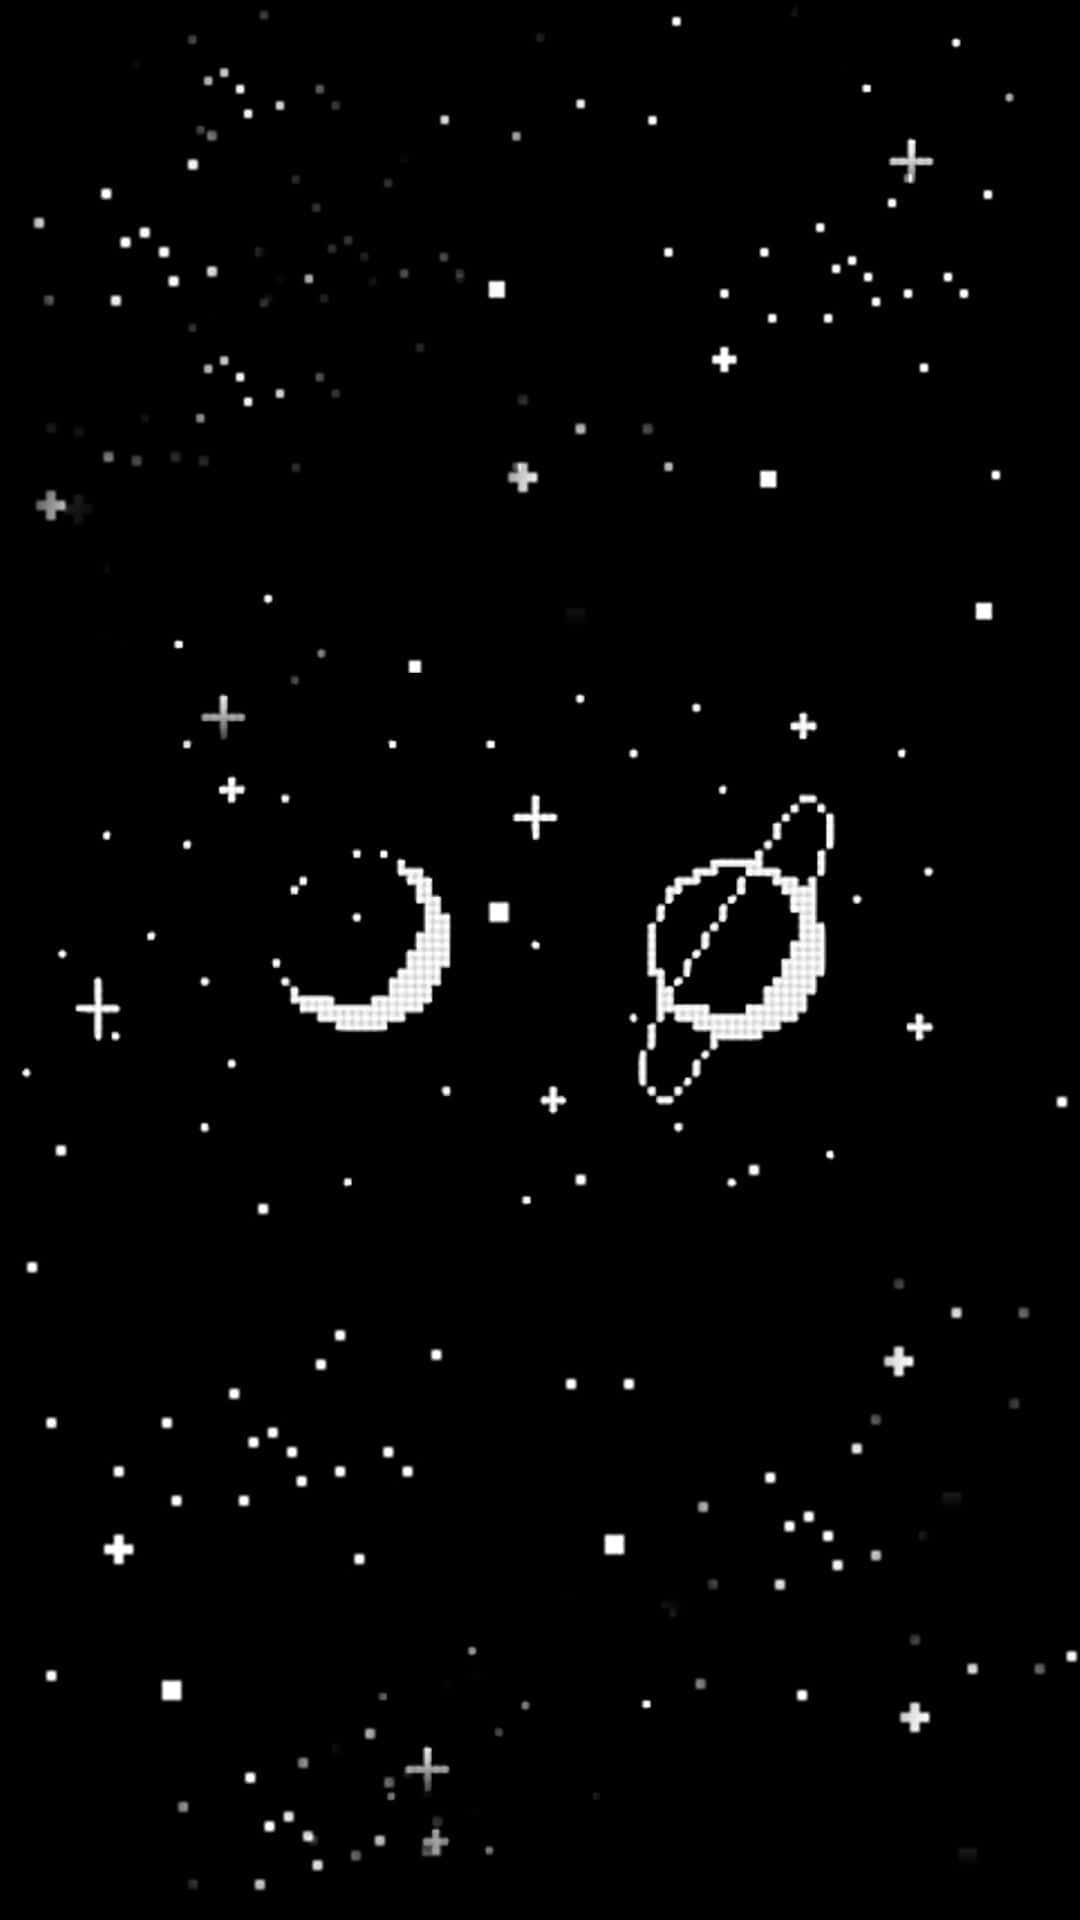 A Black And White Image Of A Space With Stars And Planets